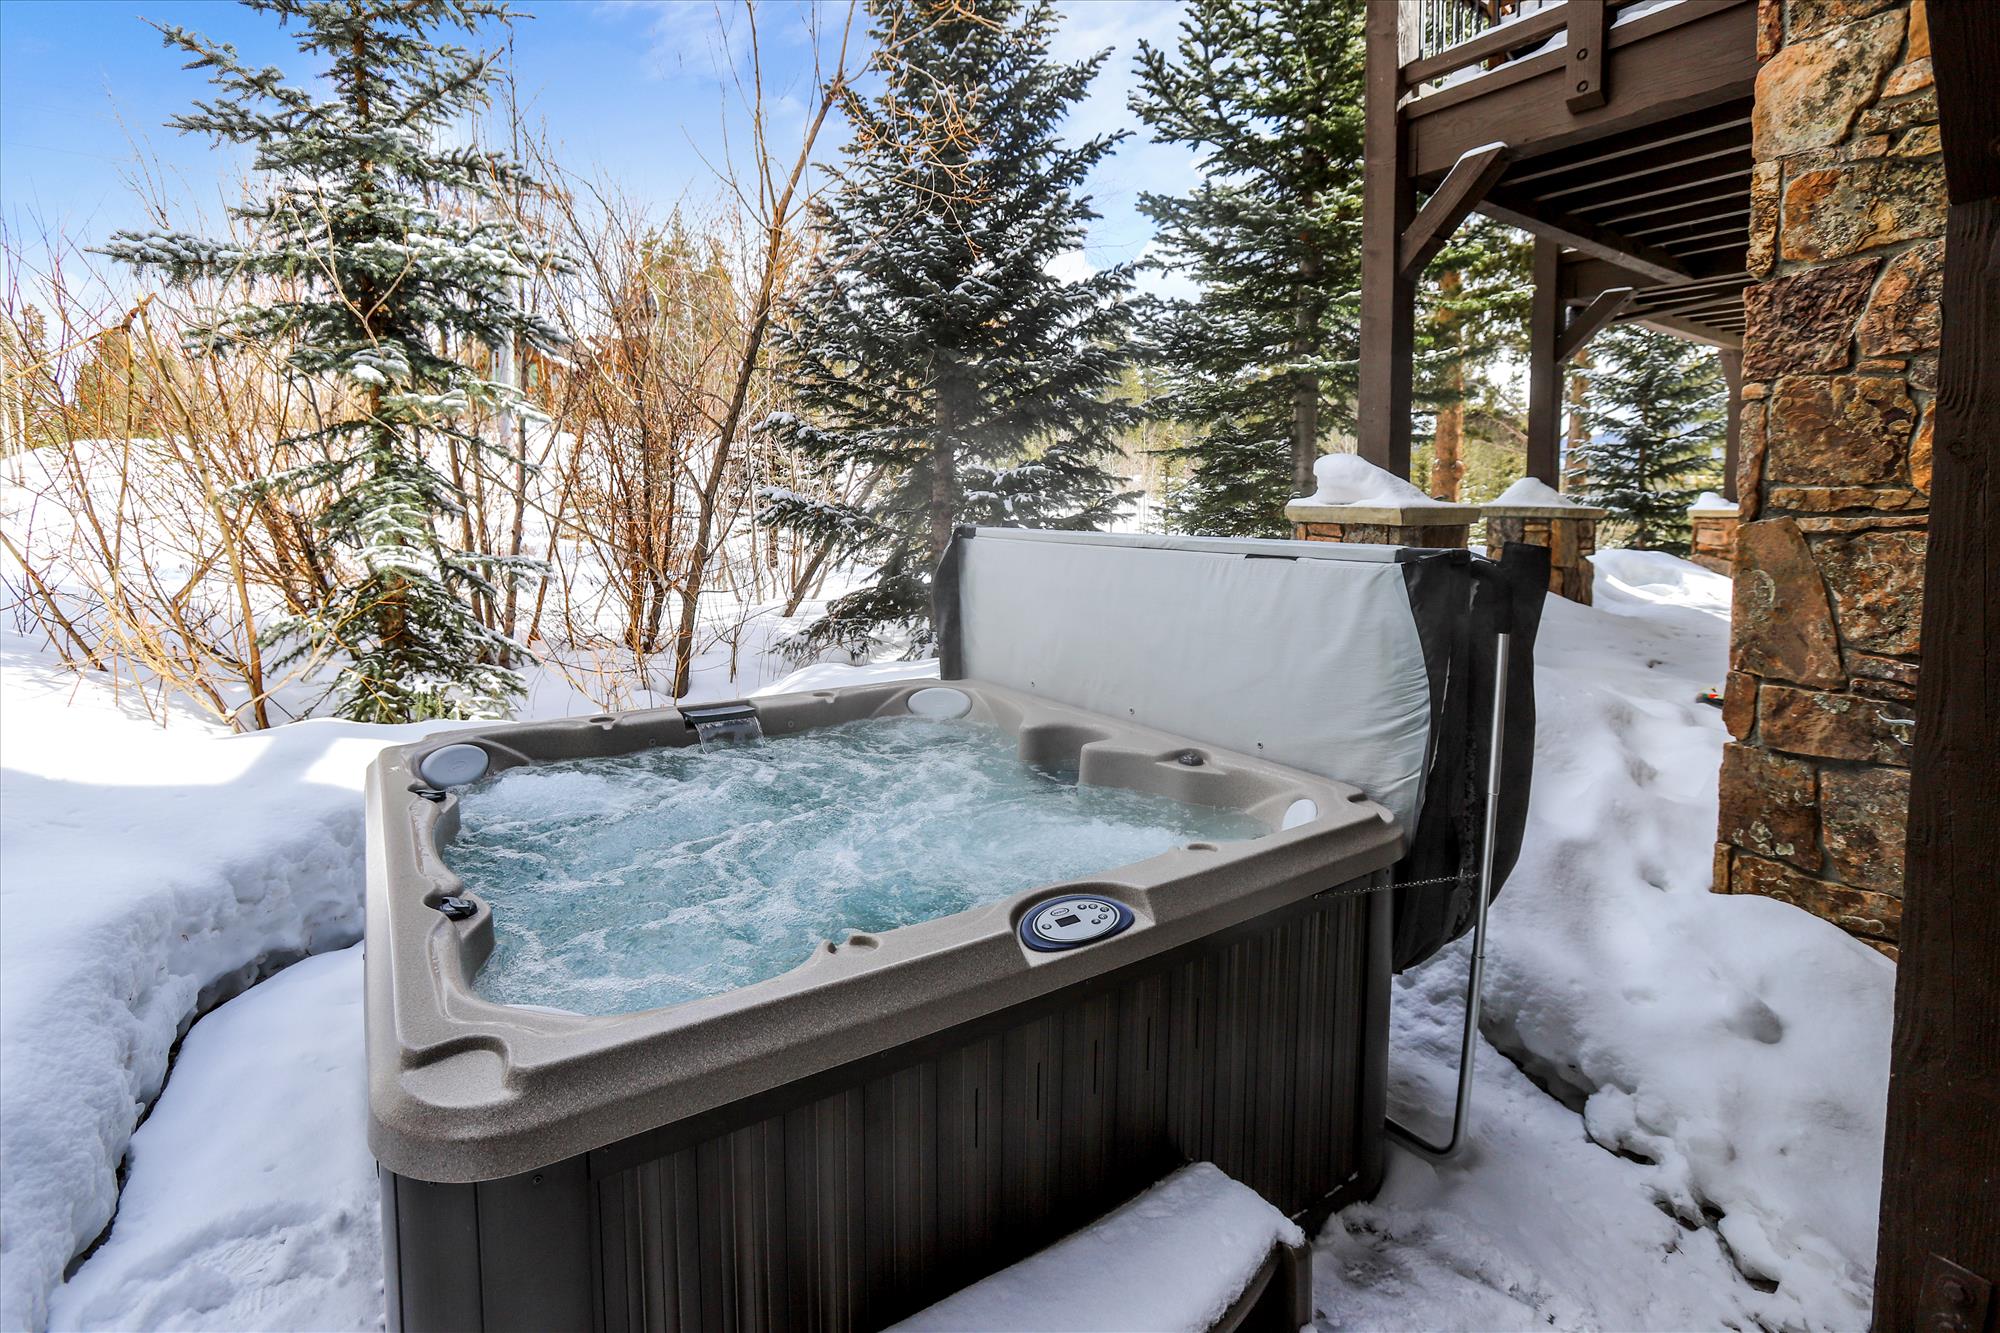 Relax your muscles after a long day on the slopes in this private hot tub.